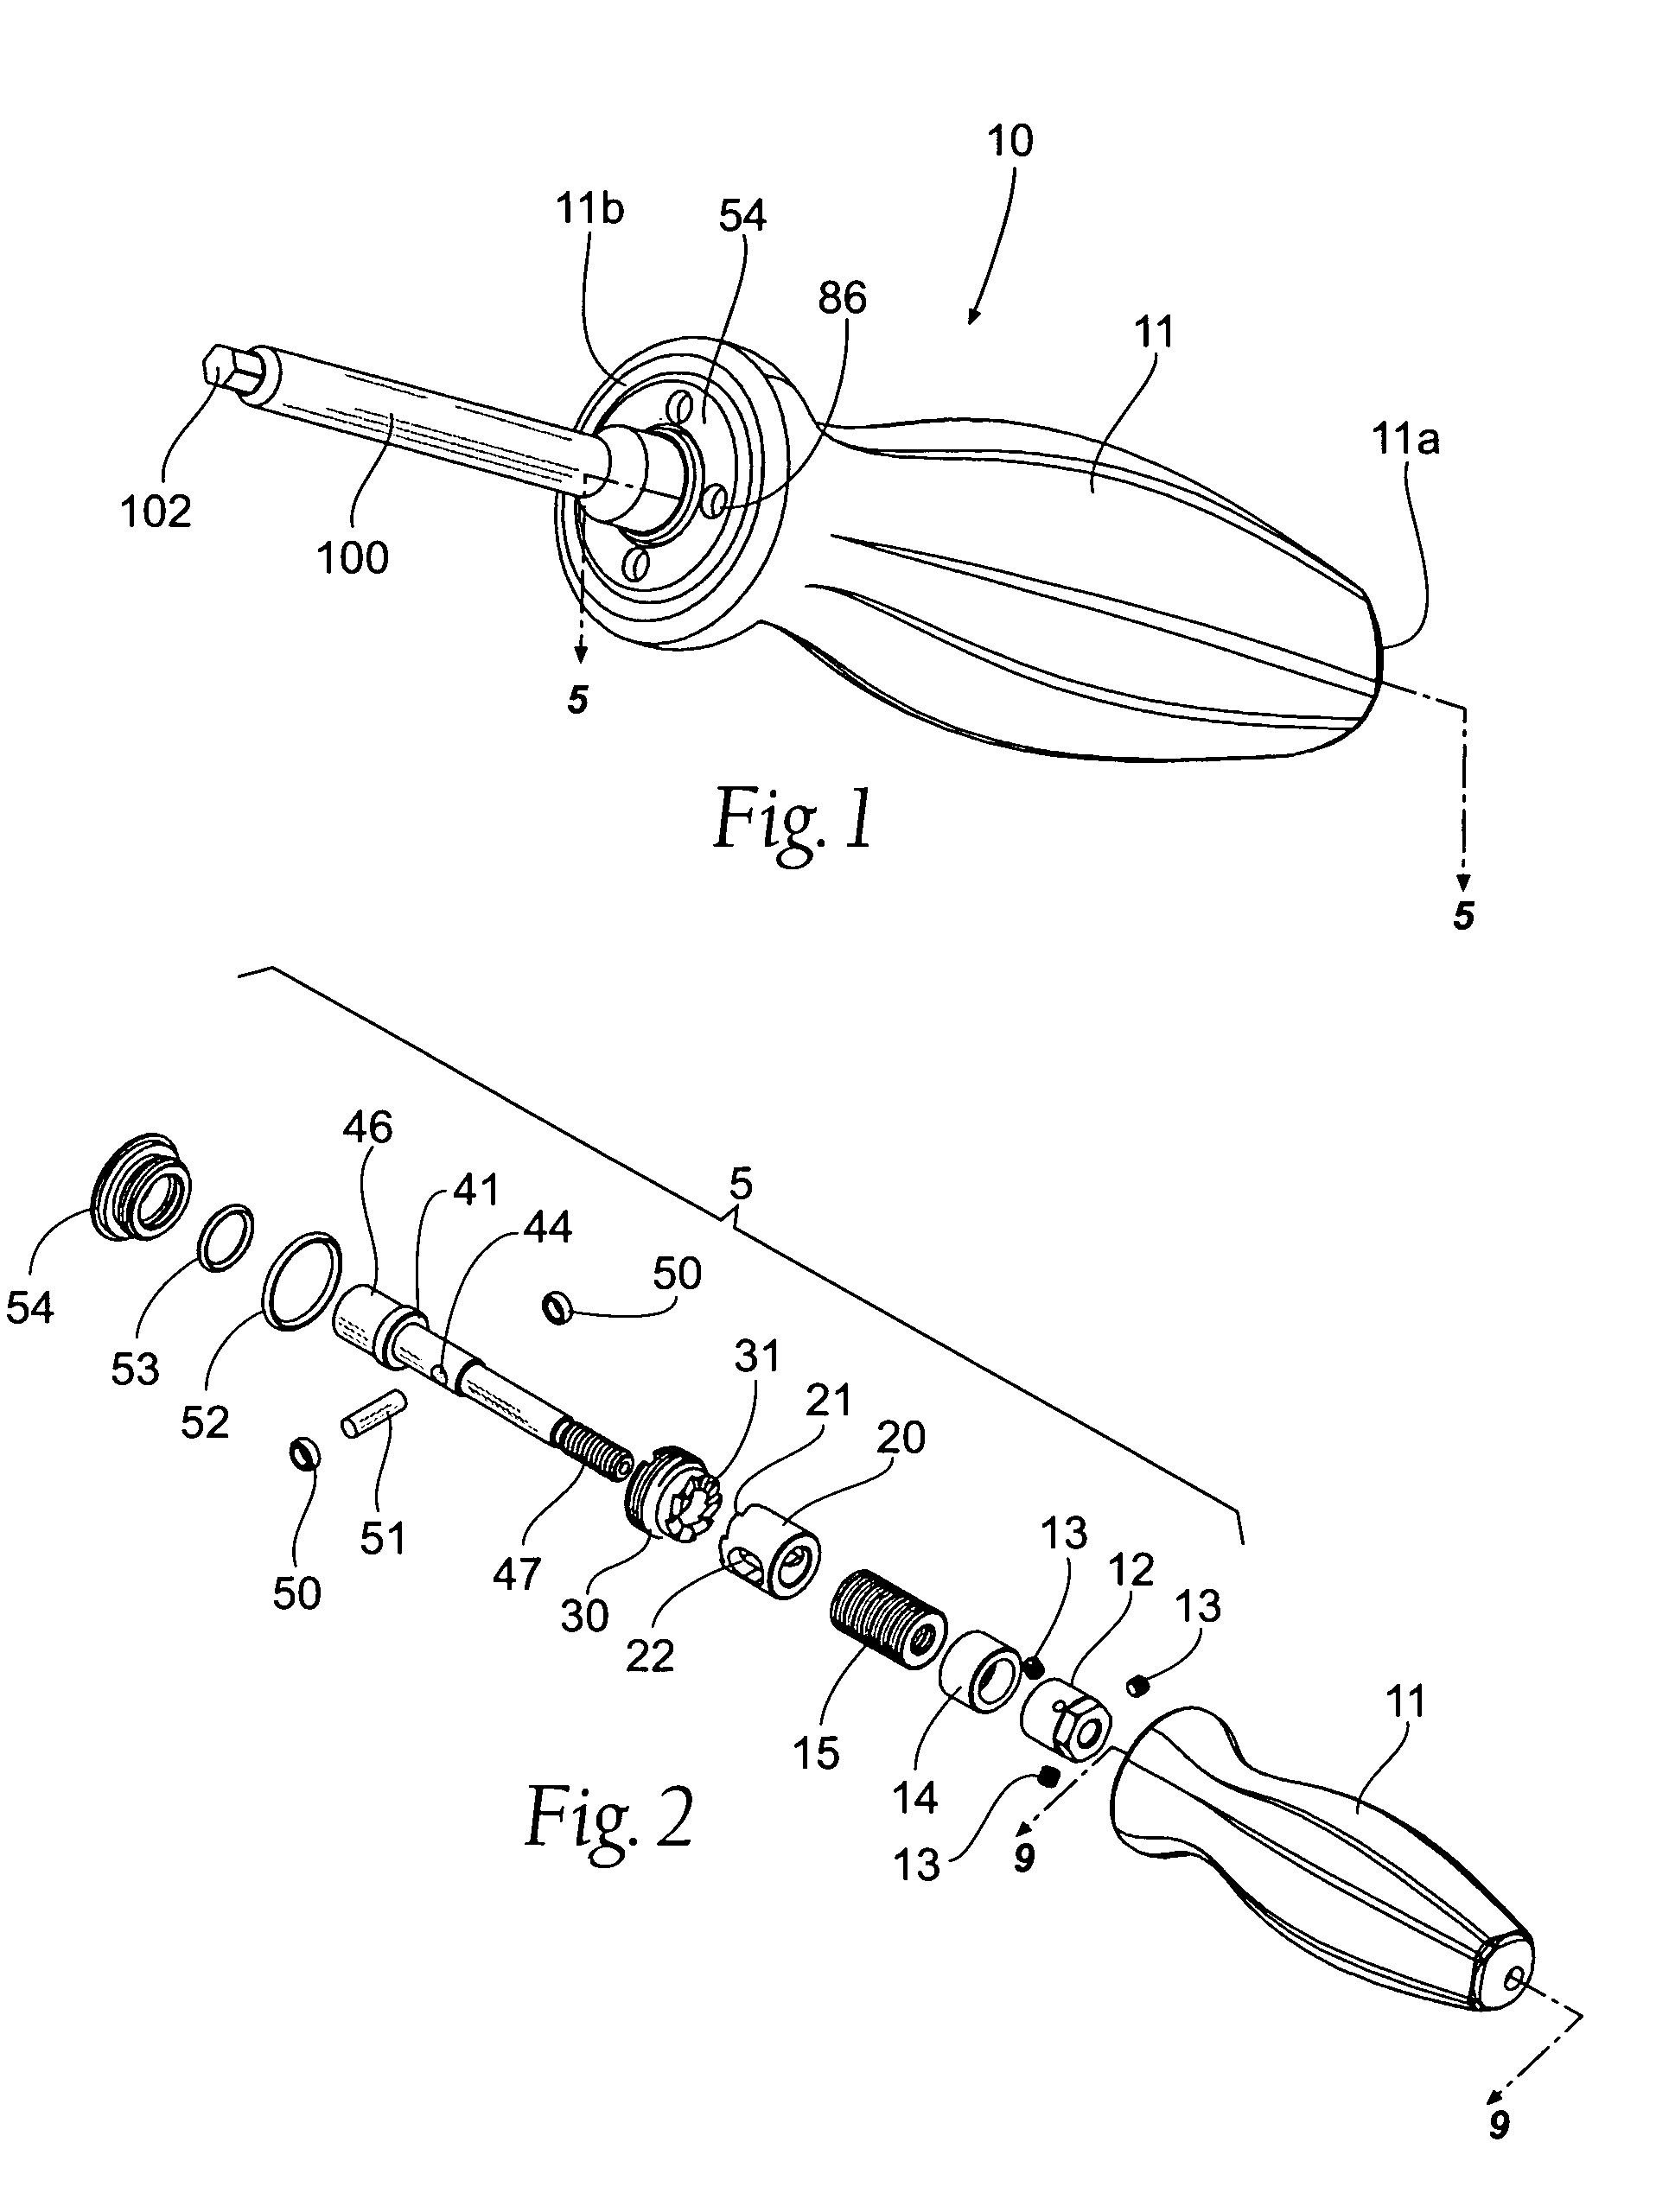 Torque limiting driver and assembly